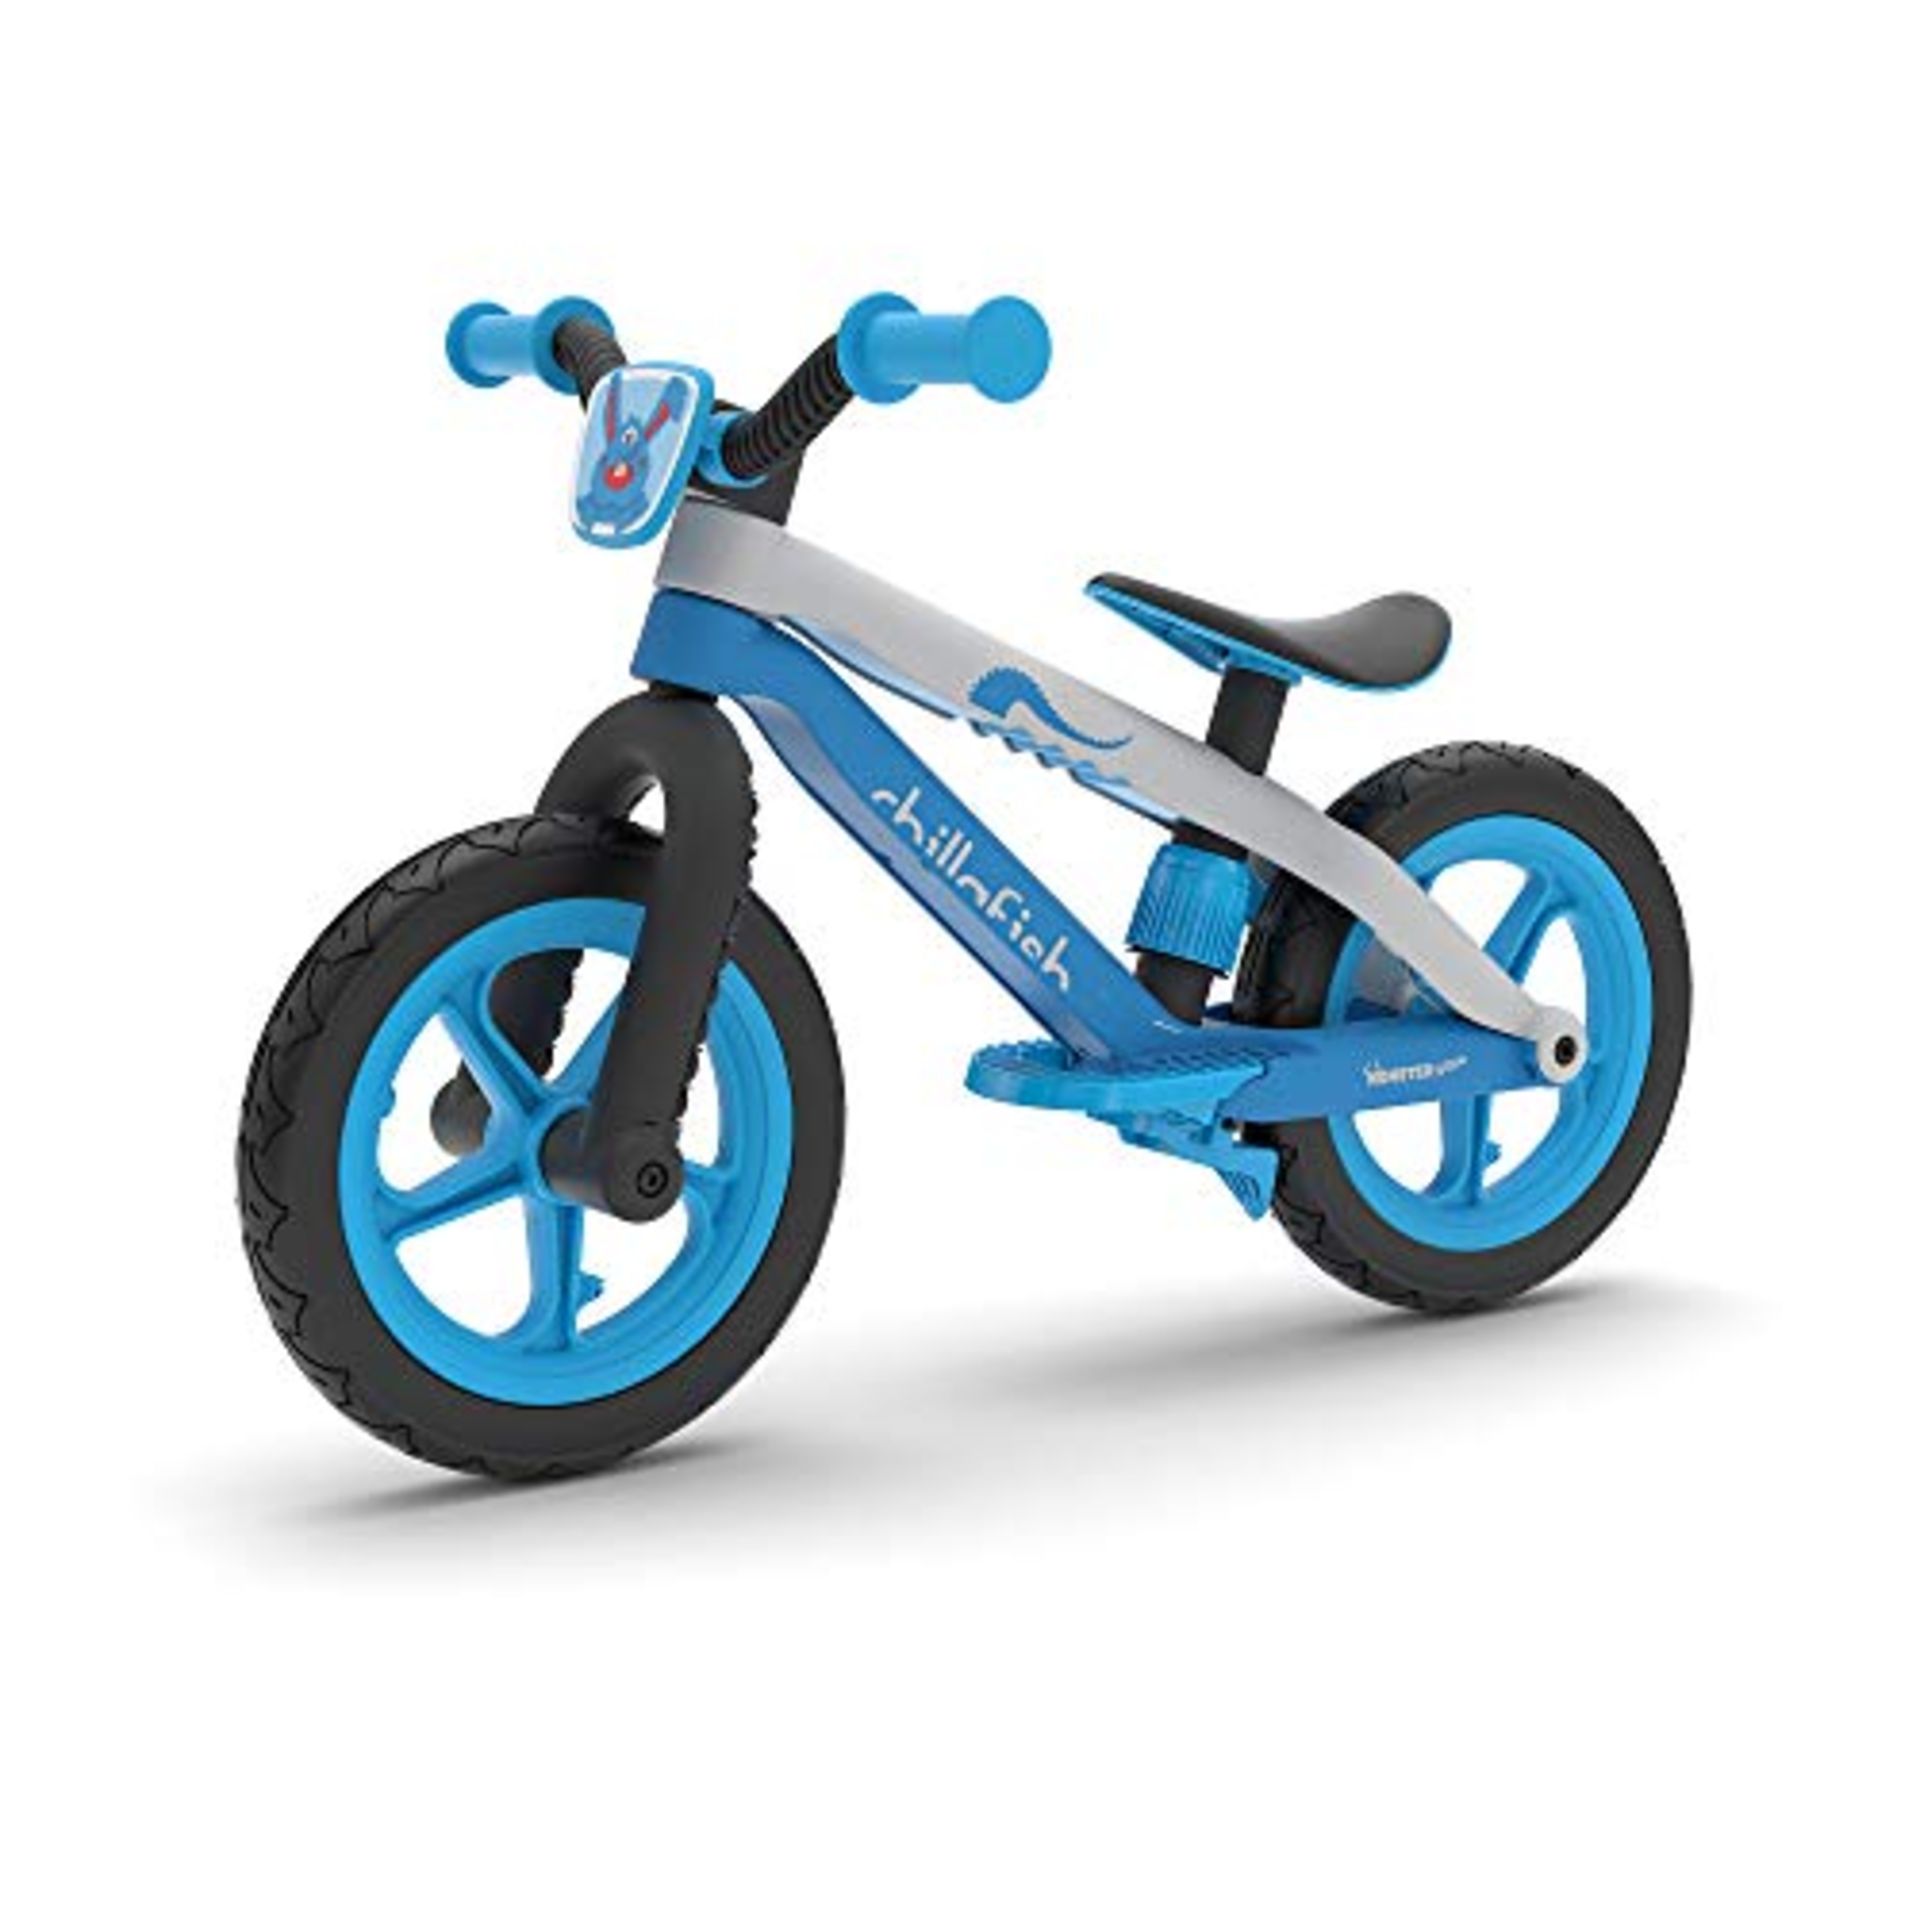 RRP £65.00 Chillafish CPMX02 BMXie 2 with Integrated Footrest and Footbrake BMX Styled Balance Bi